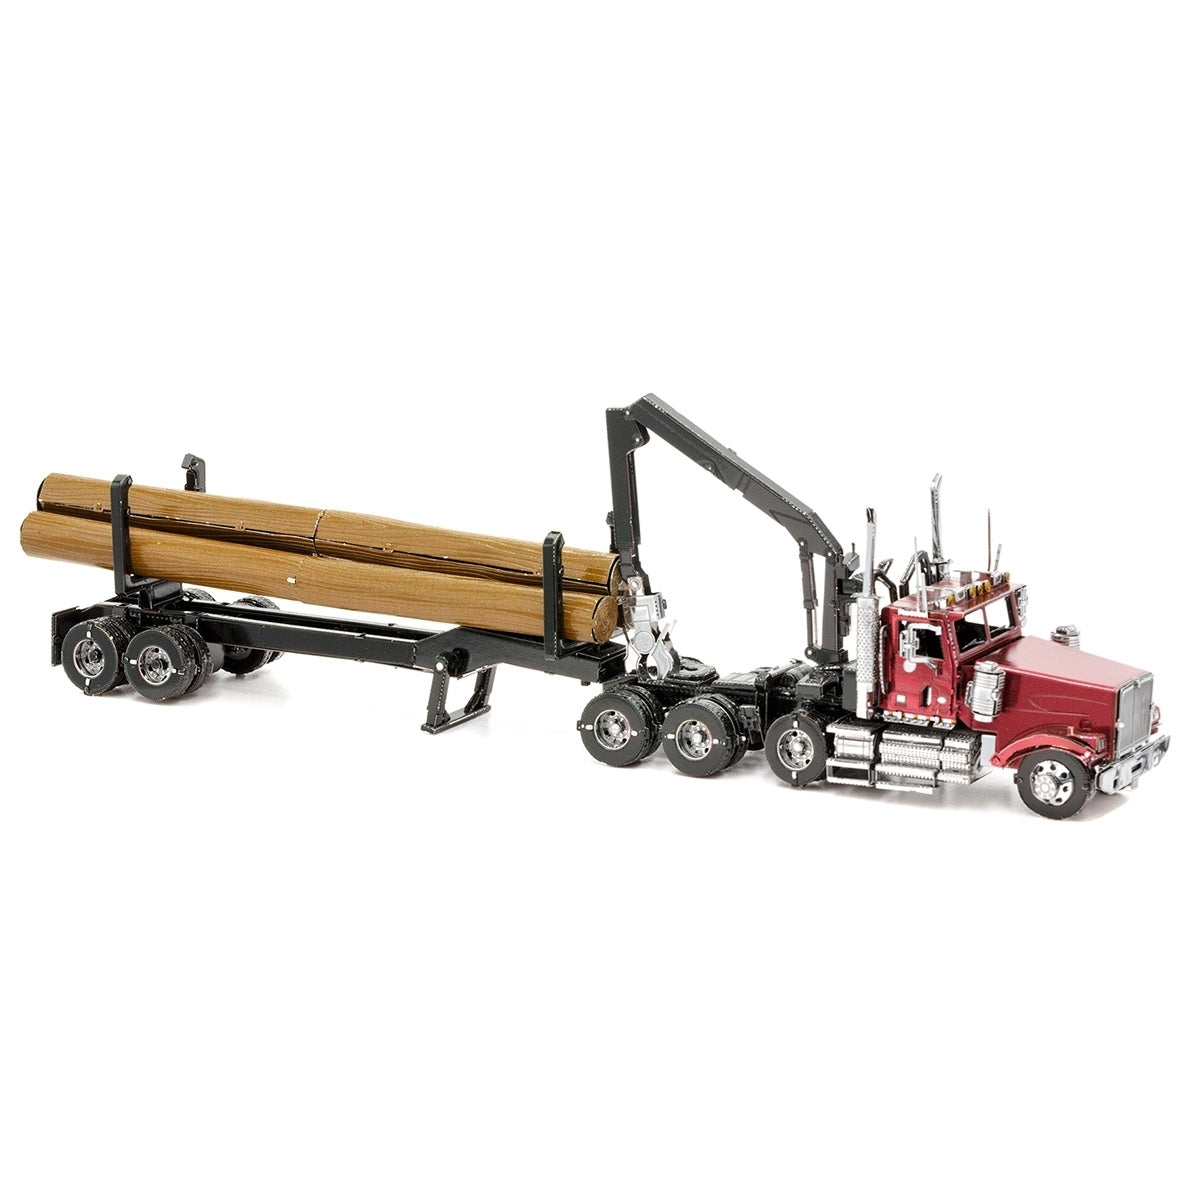 ICX136 Logging and Towing Truck - Western Star® 4900 (Buildable) 